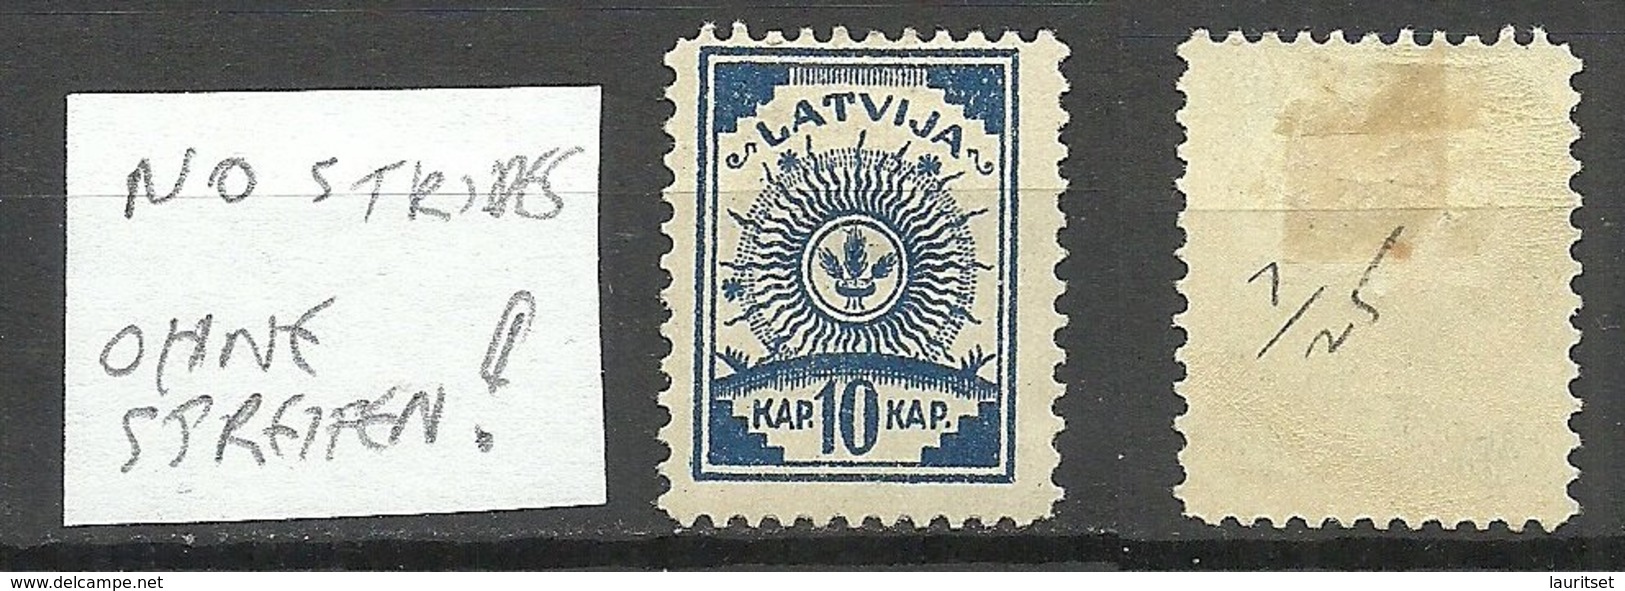 LETTLAND Latvia 1919 Michel 4 A Ohne Linien/without Lines * Randstück - Lettonia